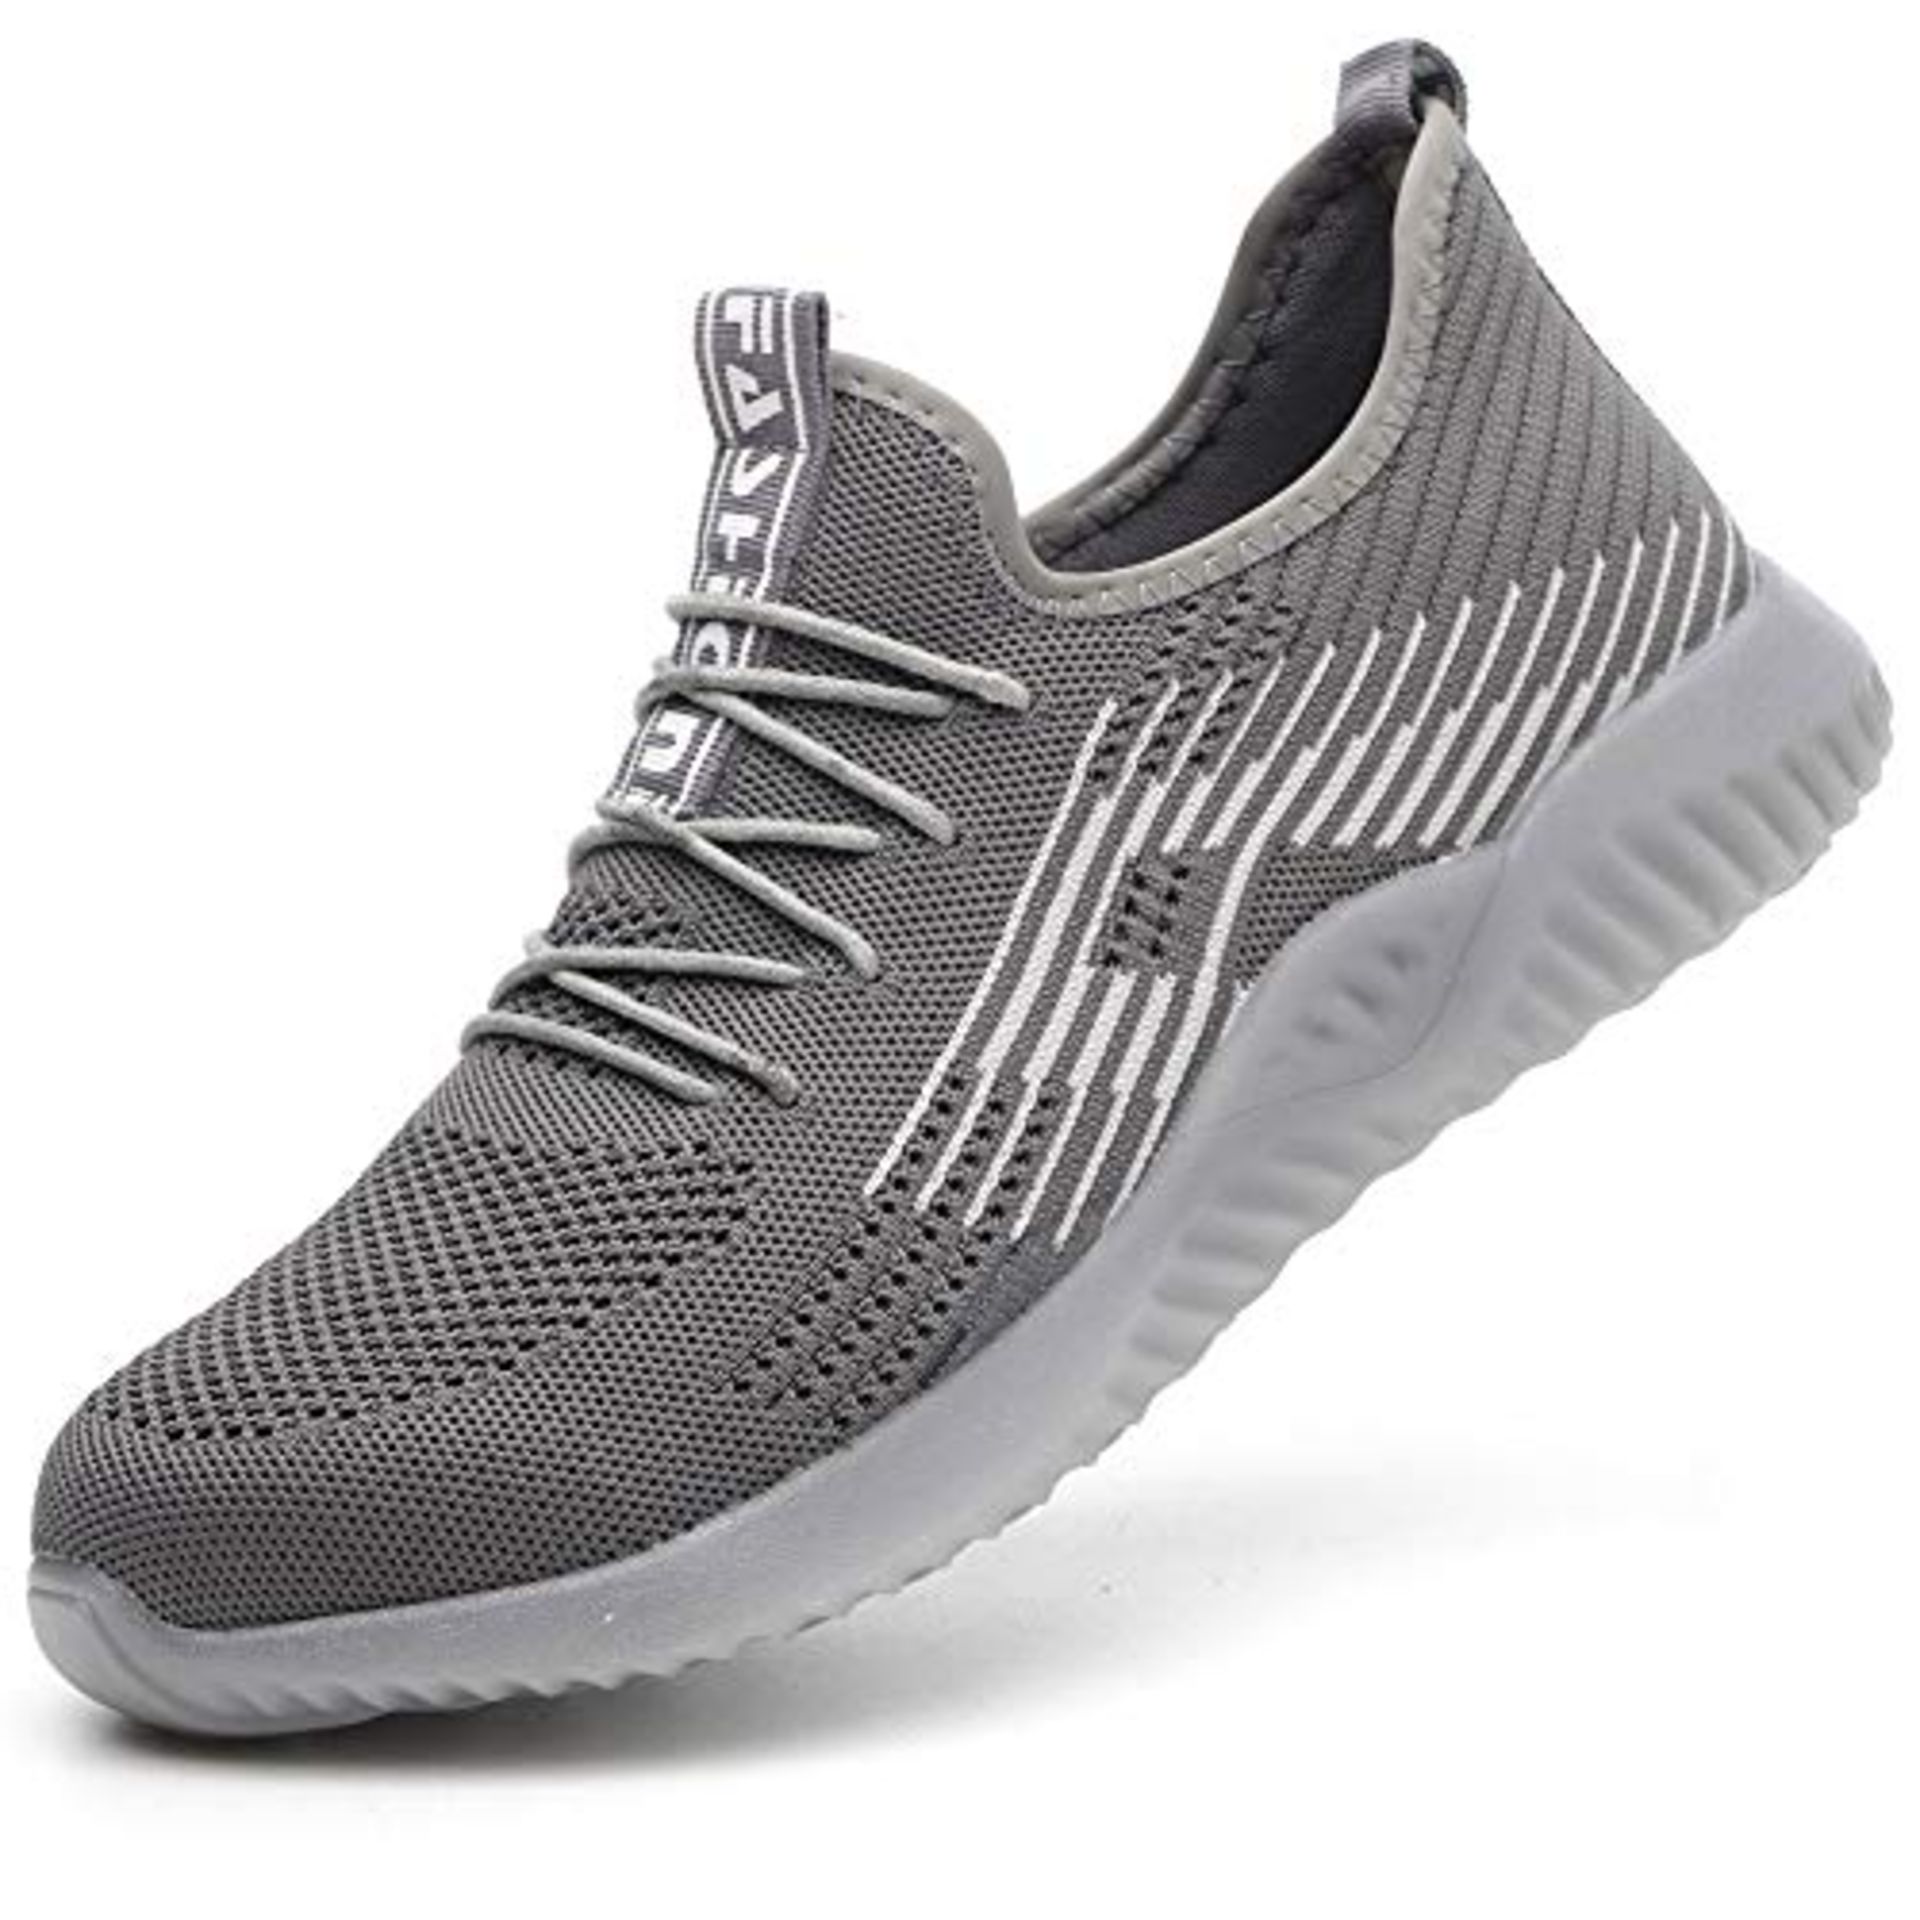 RRP £33.49 Mens Safety Shoes Lightweight Work Trainers Women Mesh Breathable Sneakers